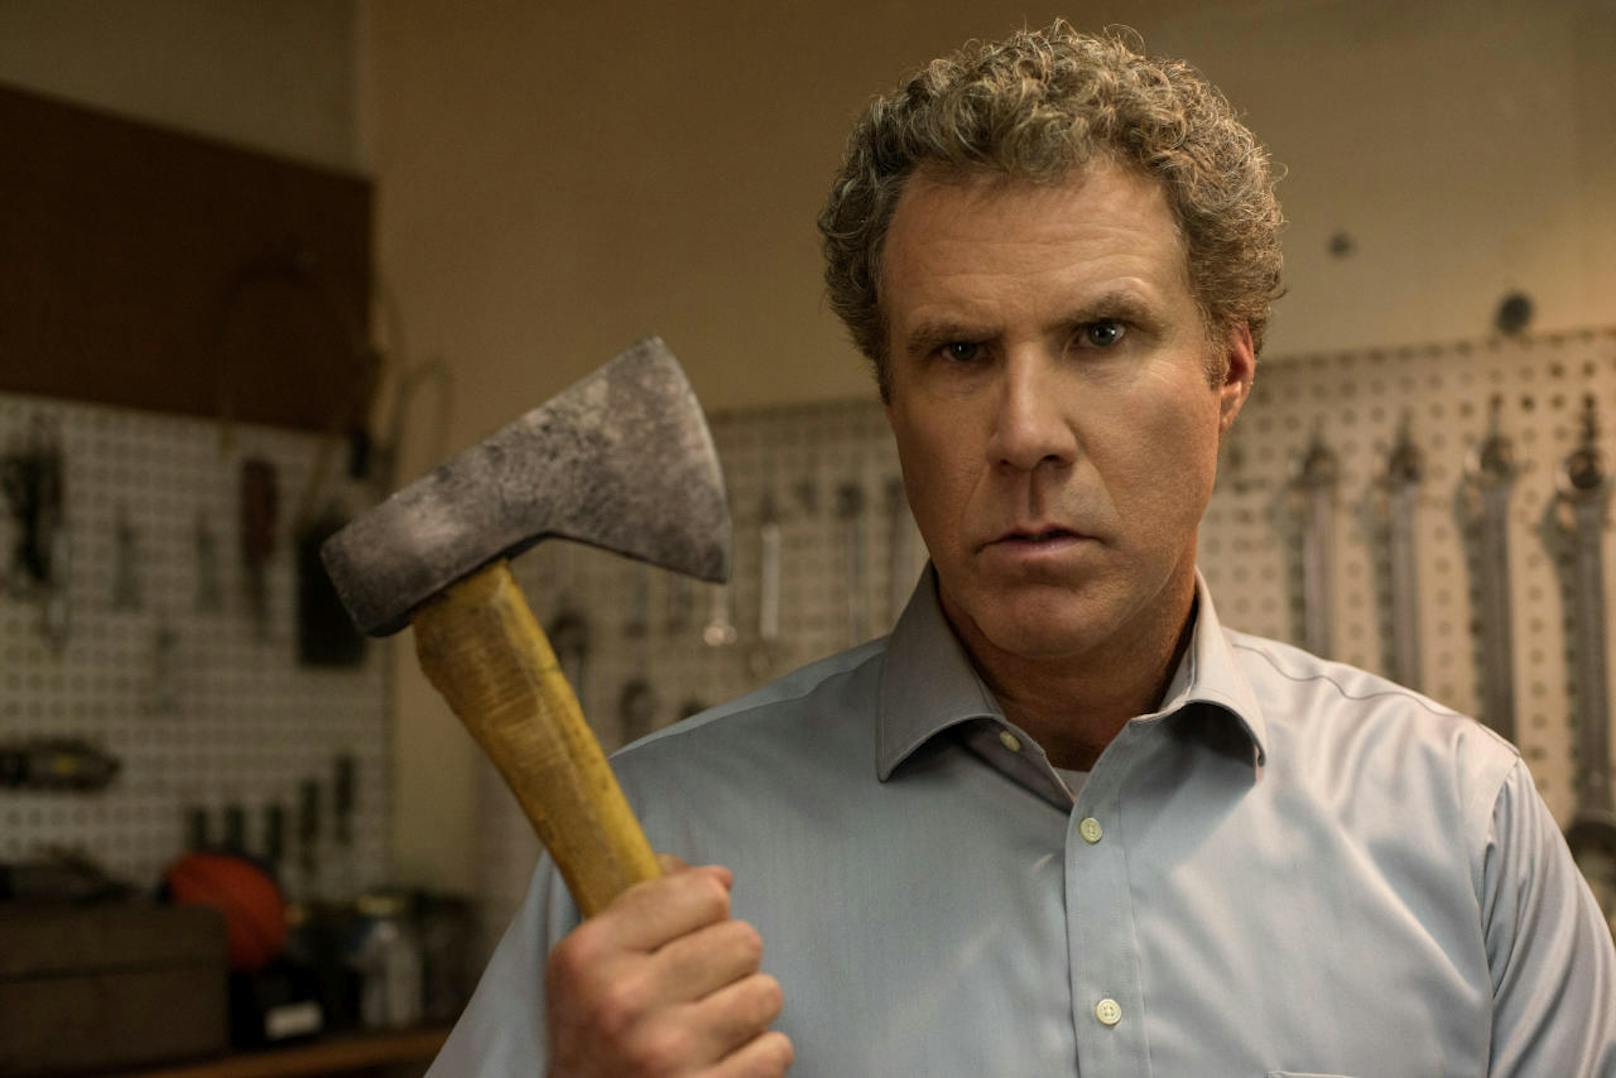 Will Ferrell in "The House"